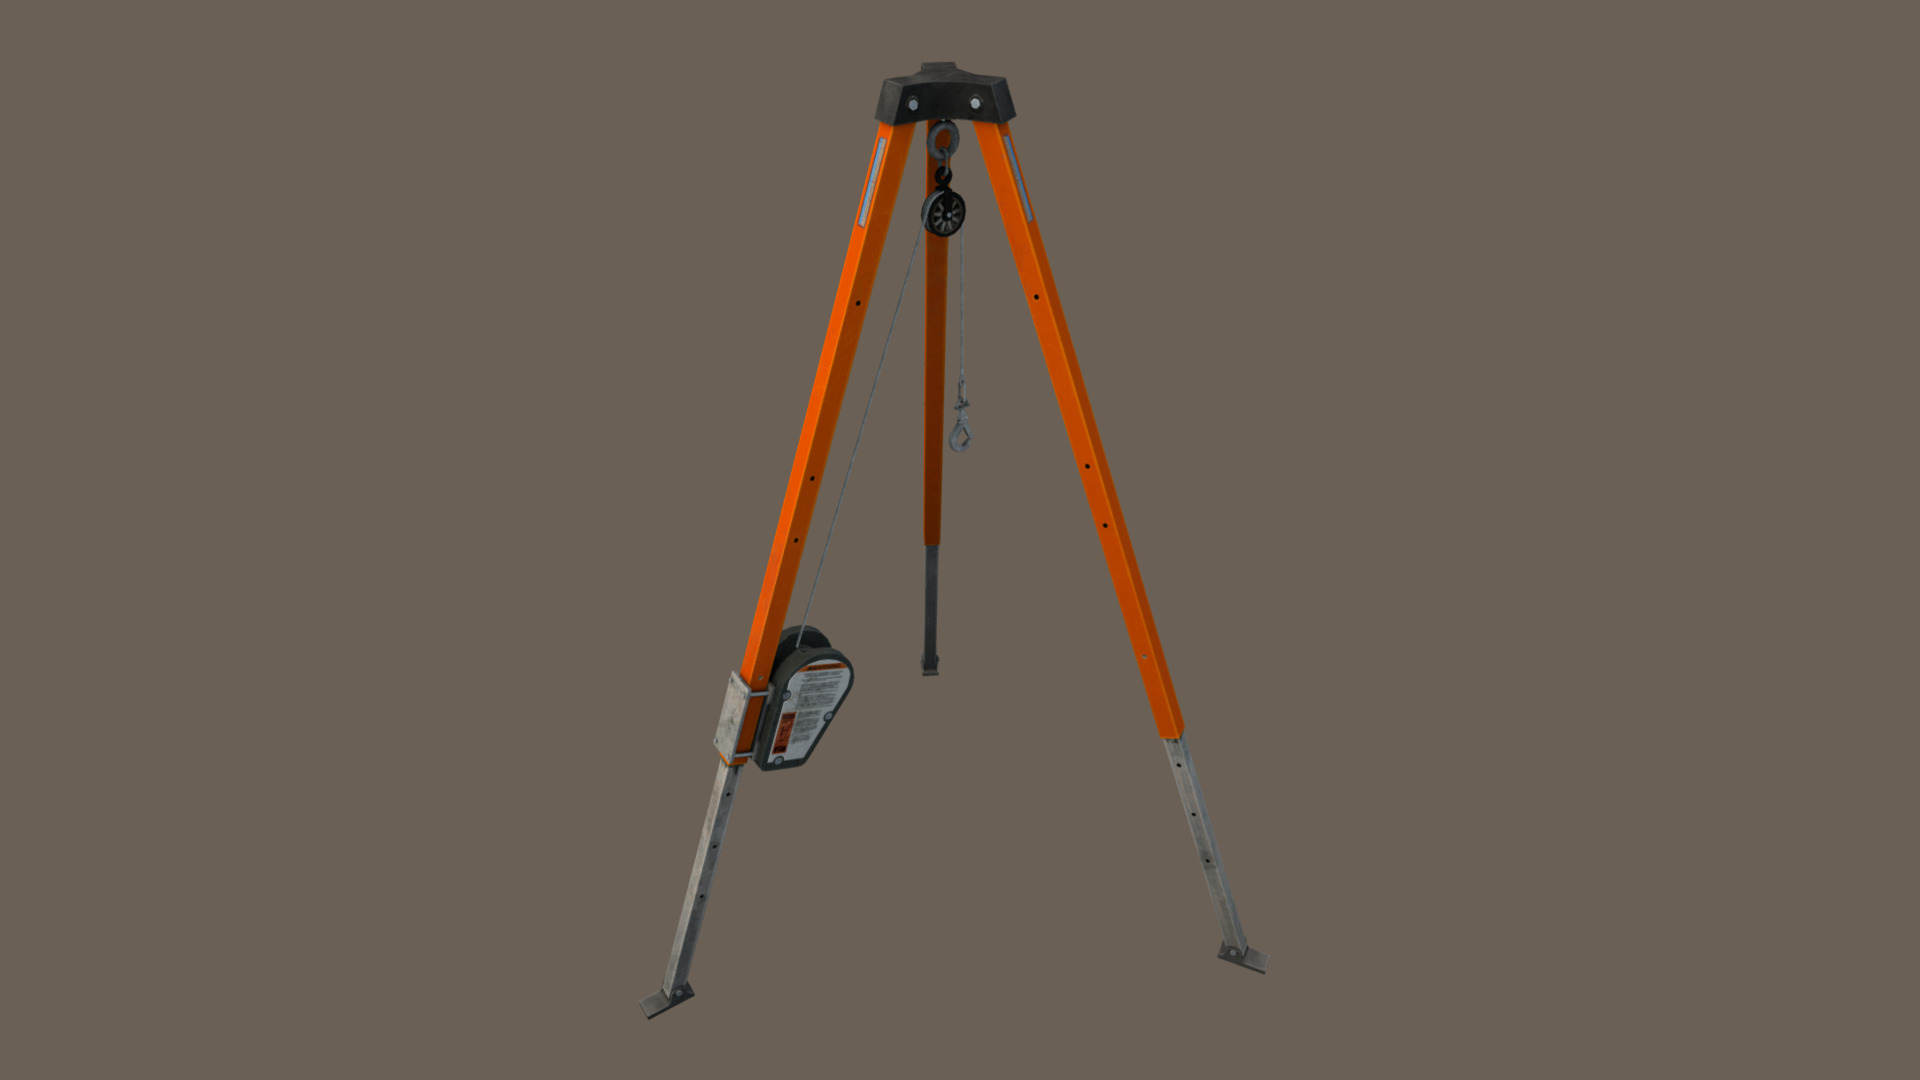 Confined space rescue tripod for Black Mesa

(http://www.blackmesasource.com/) - Rescue Tripod - 3D model by CommonSpence 3d model